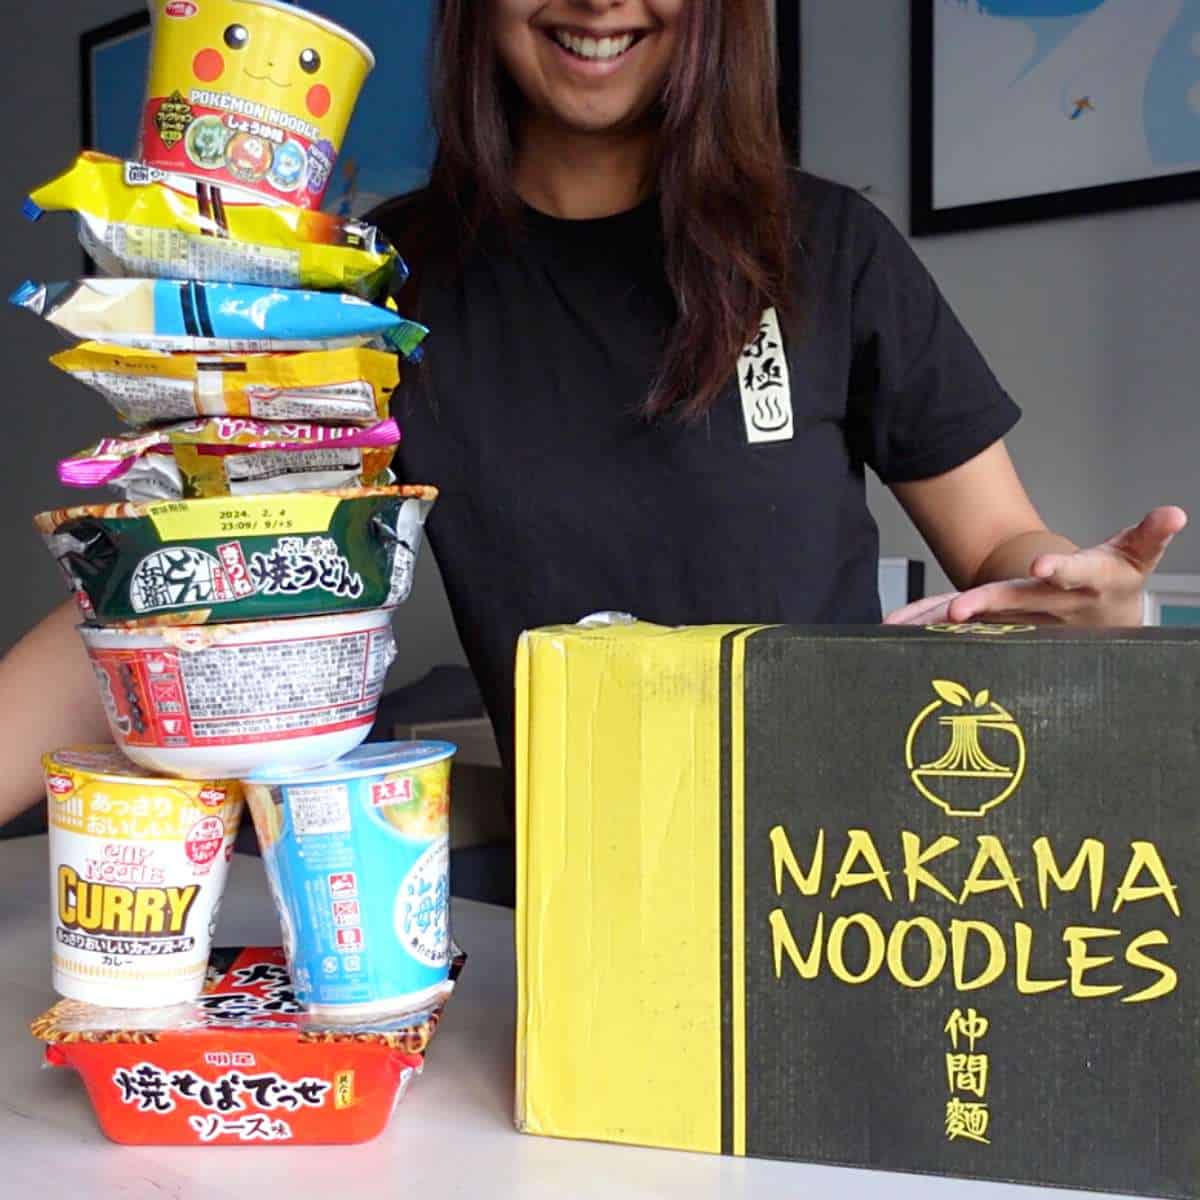 stacking instant noodles from Nakama